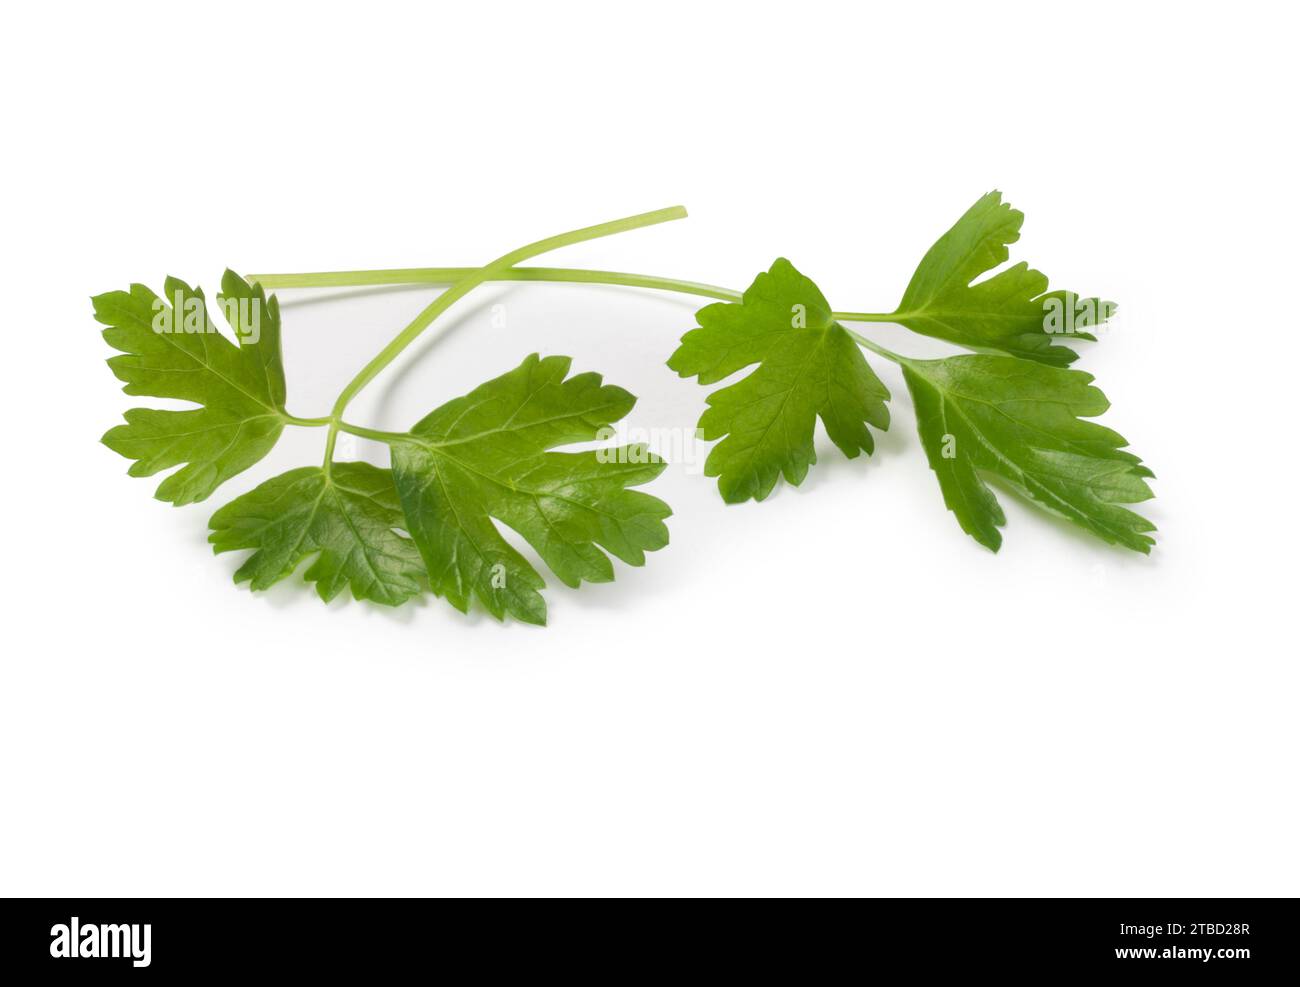 Studio shot of parsley leaf cut out against a white background Stock Photo